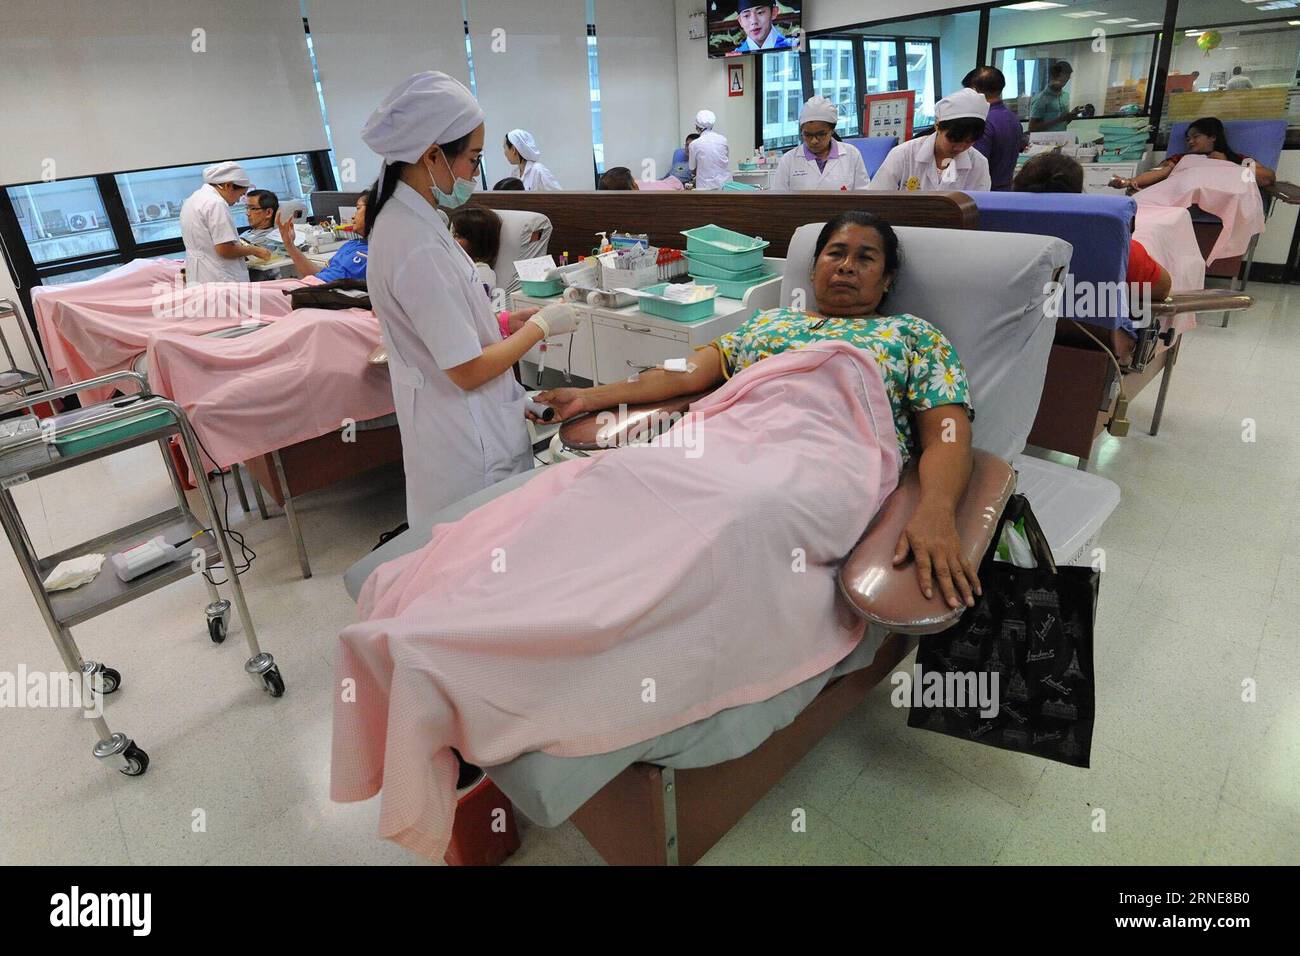 (160614) -- BANGKOK, June 14, 2016 -- Thai volunteers donate blood at National Blood Centre of Thai Red Cross Society in Bangkok, Thailand, June 14, 2016. The World Blood Donor Day is celebrated every year on June 14. The theme of this year s World Blood Donor Day is Blood connects us all. ) THAILAND-BANGKOK-WORLD BLOOD DONOR DAY RachenxSageamsak PUBLICATIONxNOTxINxCHN   160614 Bangkok June 14 2016 Thai Volunteers Donate Blood AT National Blood Centre of Thai Red Cross Society in Bangkok Thai country June 14 2016 The World Blood Donor Day IS celebrated Every Year ON June 14 The Theme of This Y Stock Photo